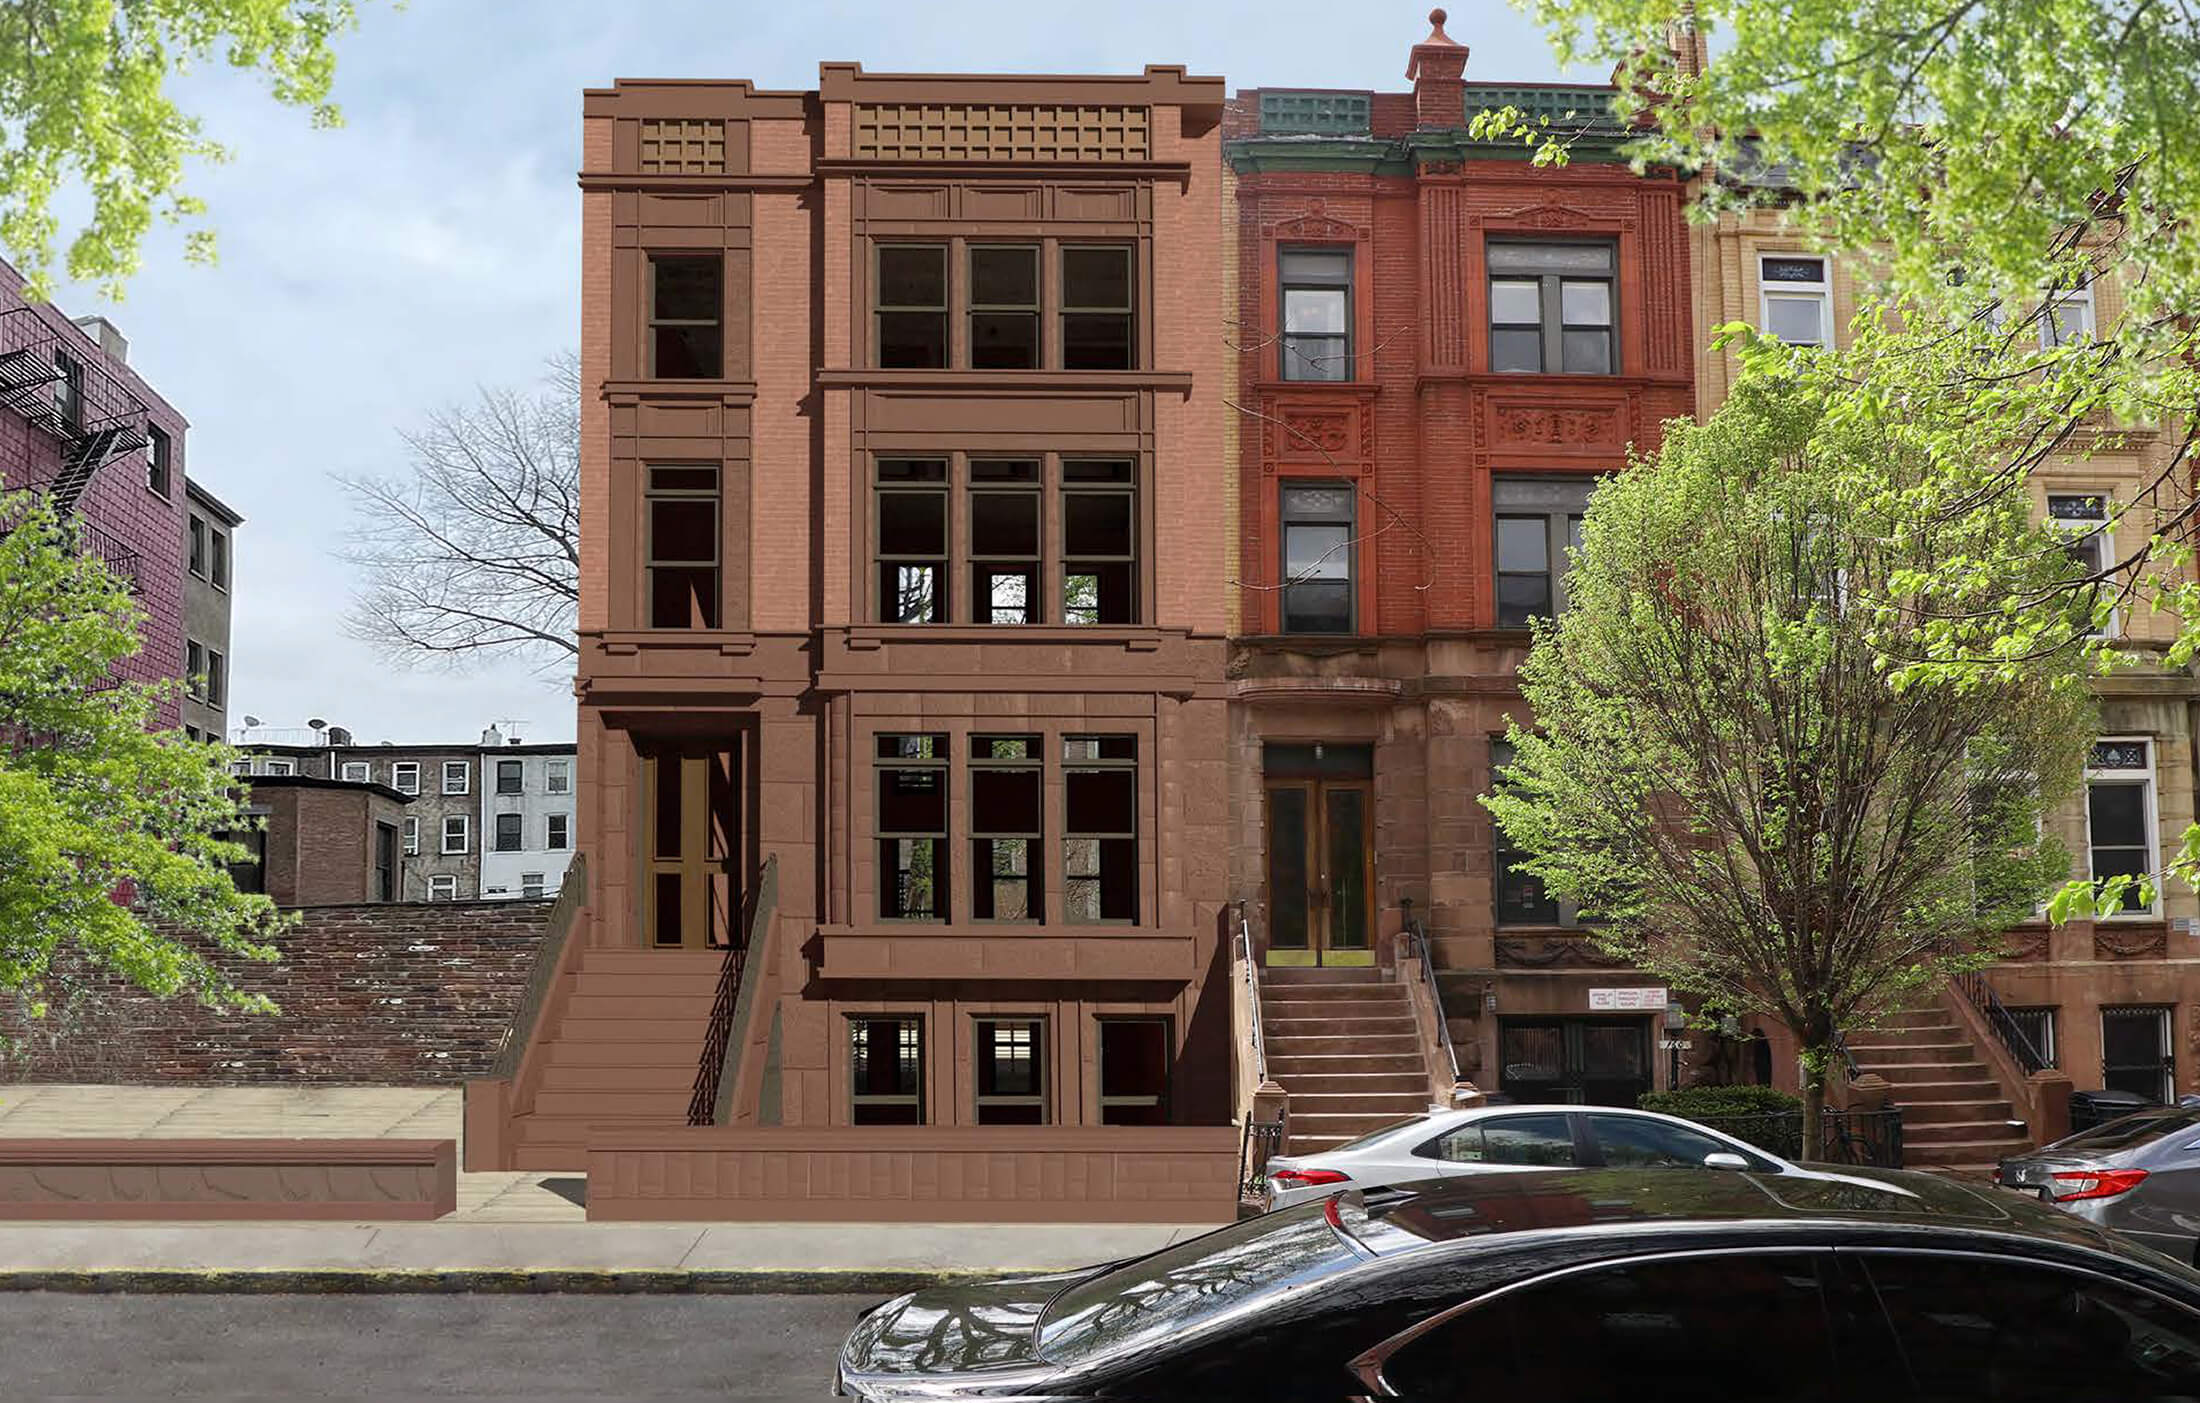 162 hancock rendering show a modern row house of brick and brownstone